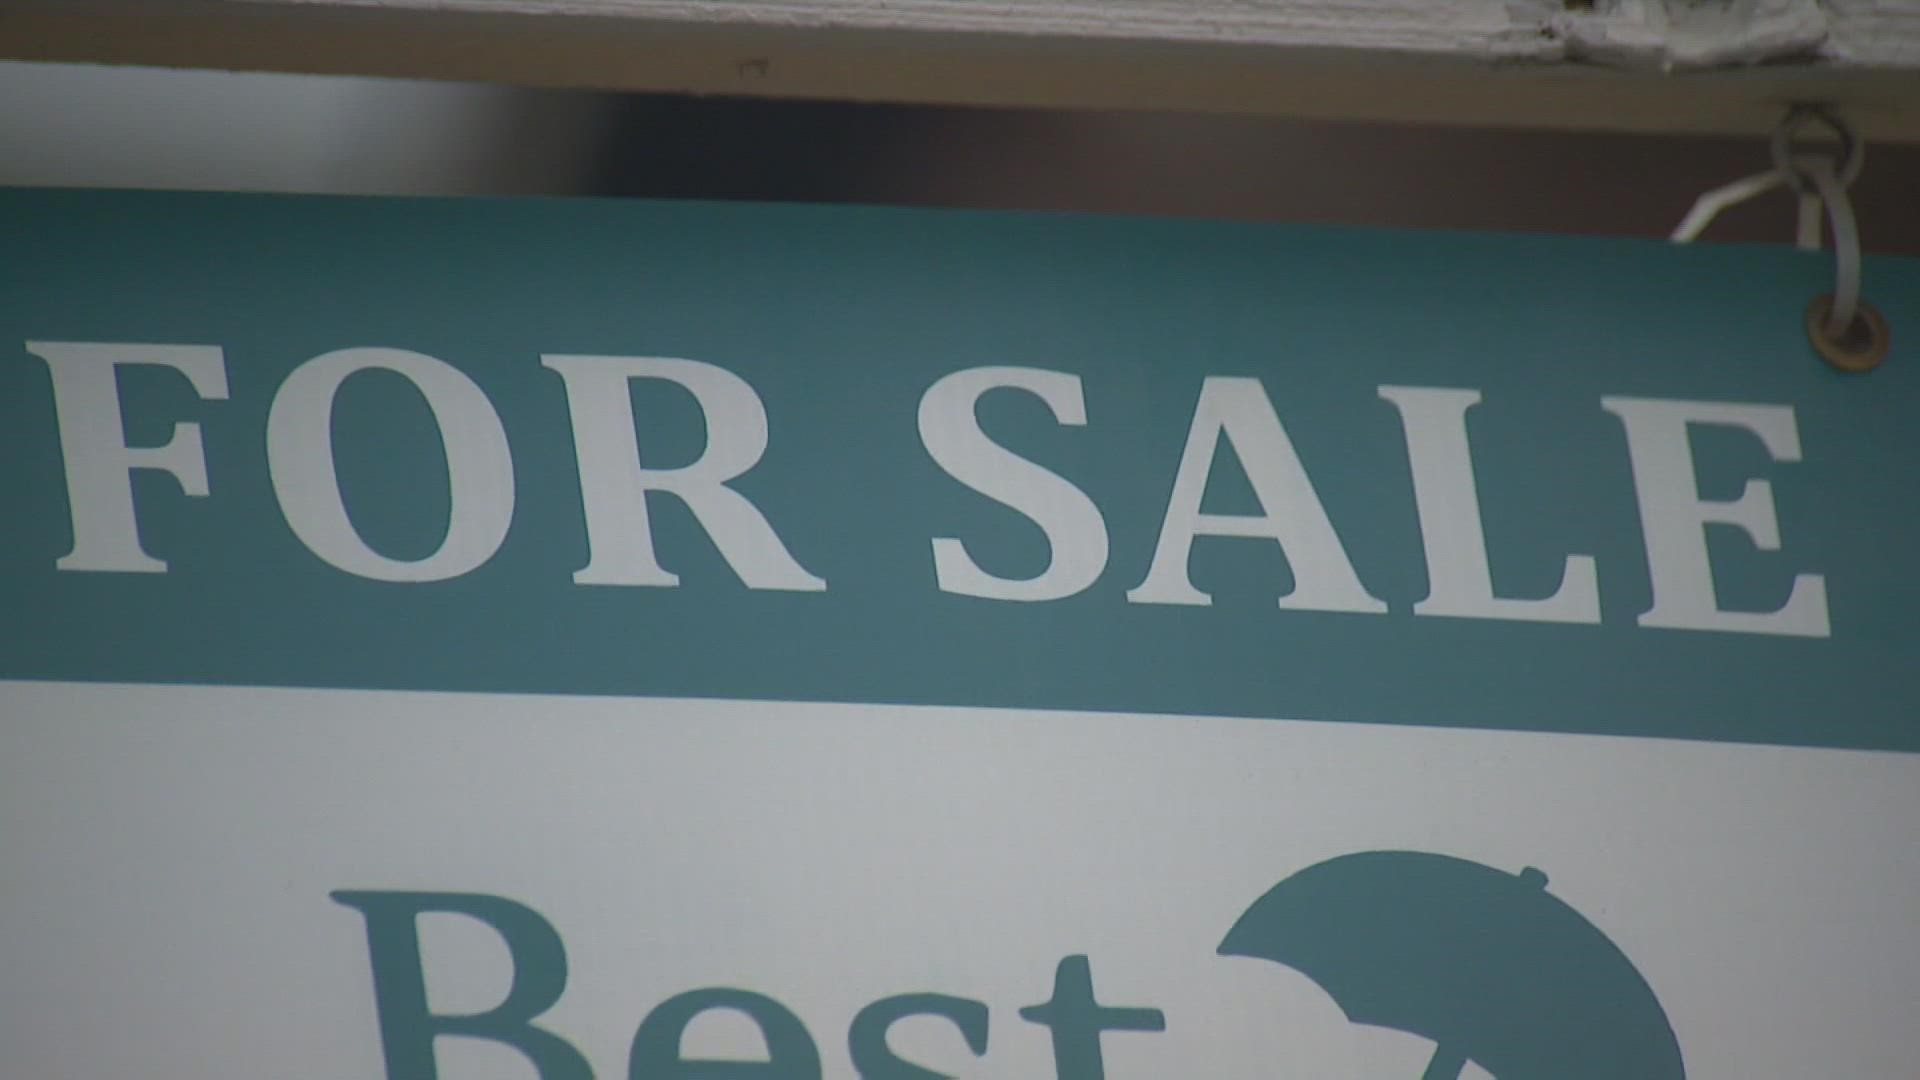 Pierce County’s housing market is showing signs of cooling after months of high demand and low supply.